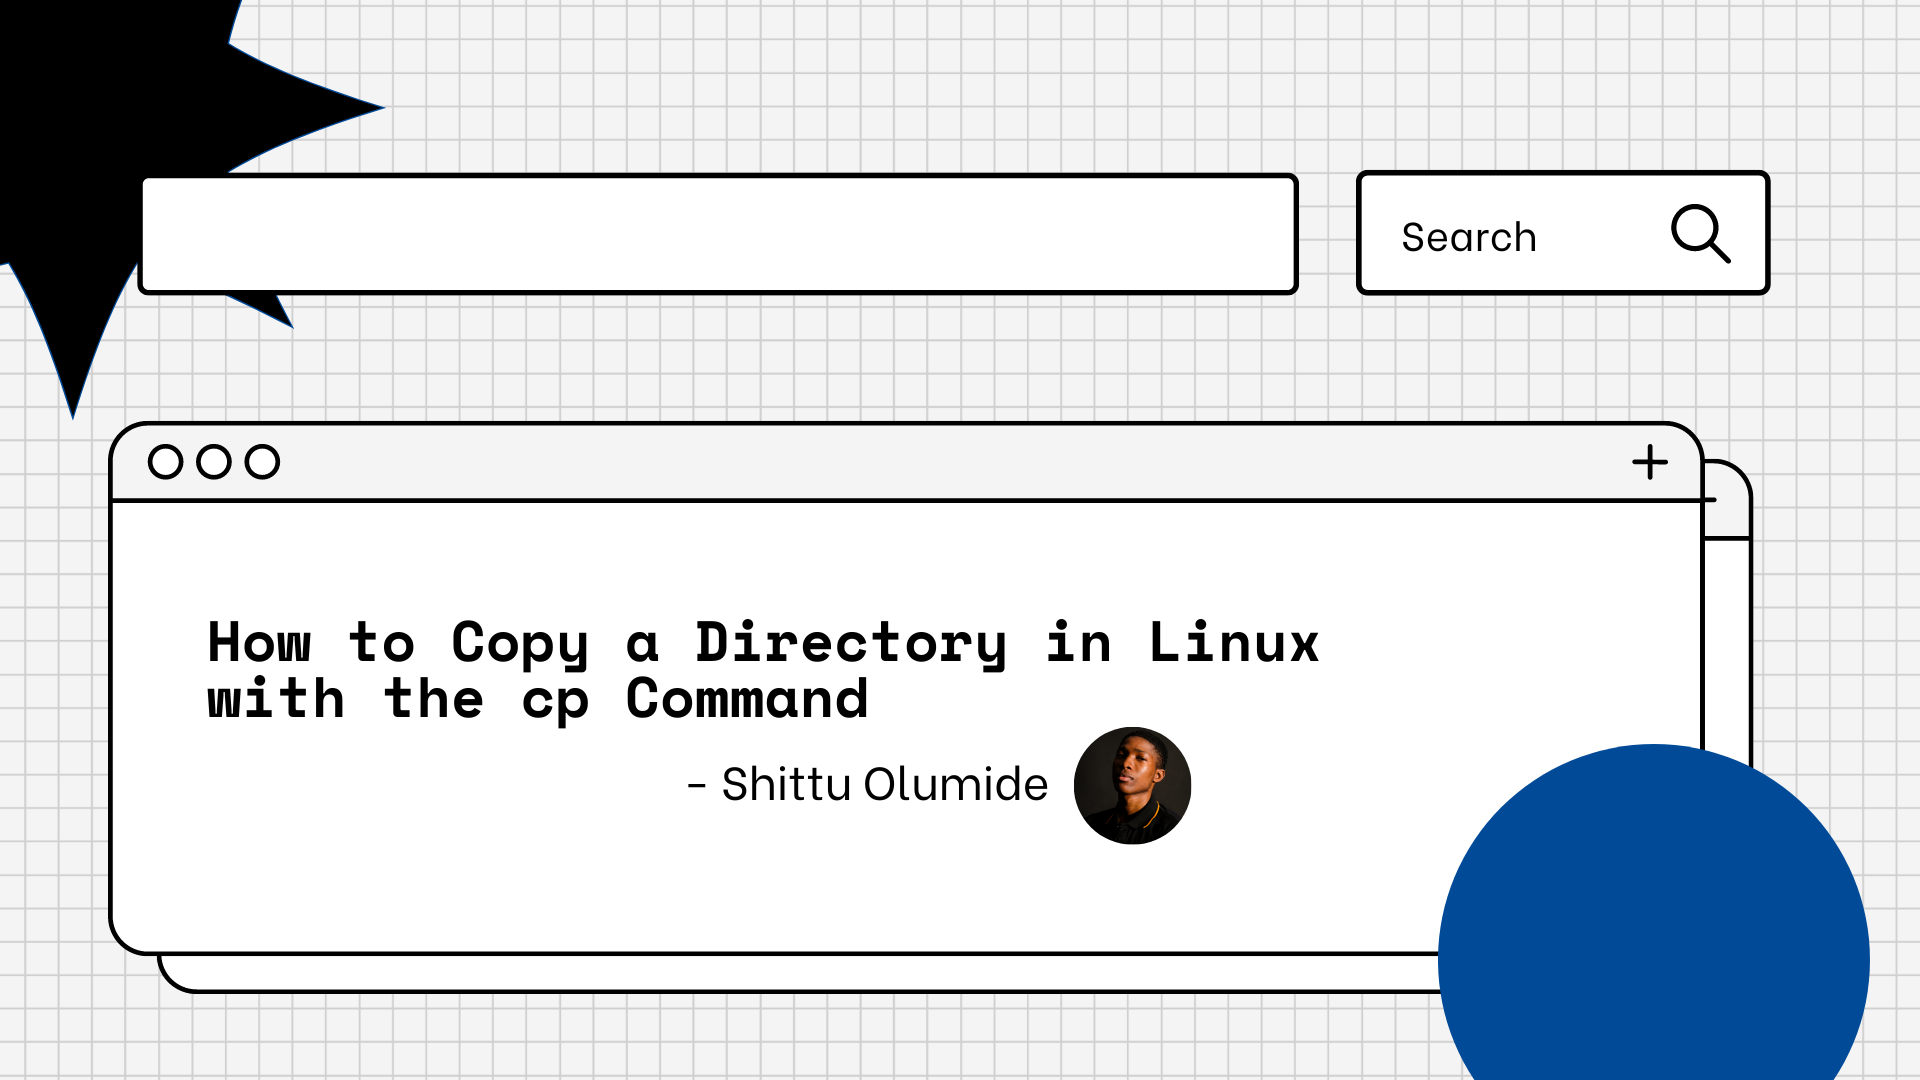 How to Copy a Directory in Linux with the cp Command